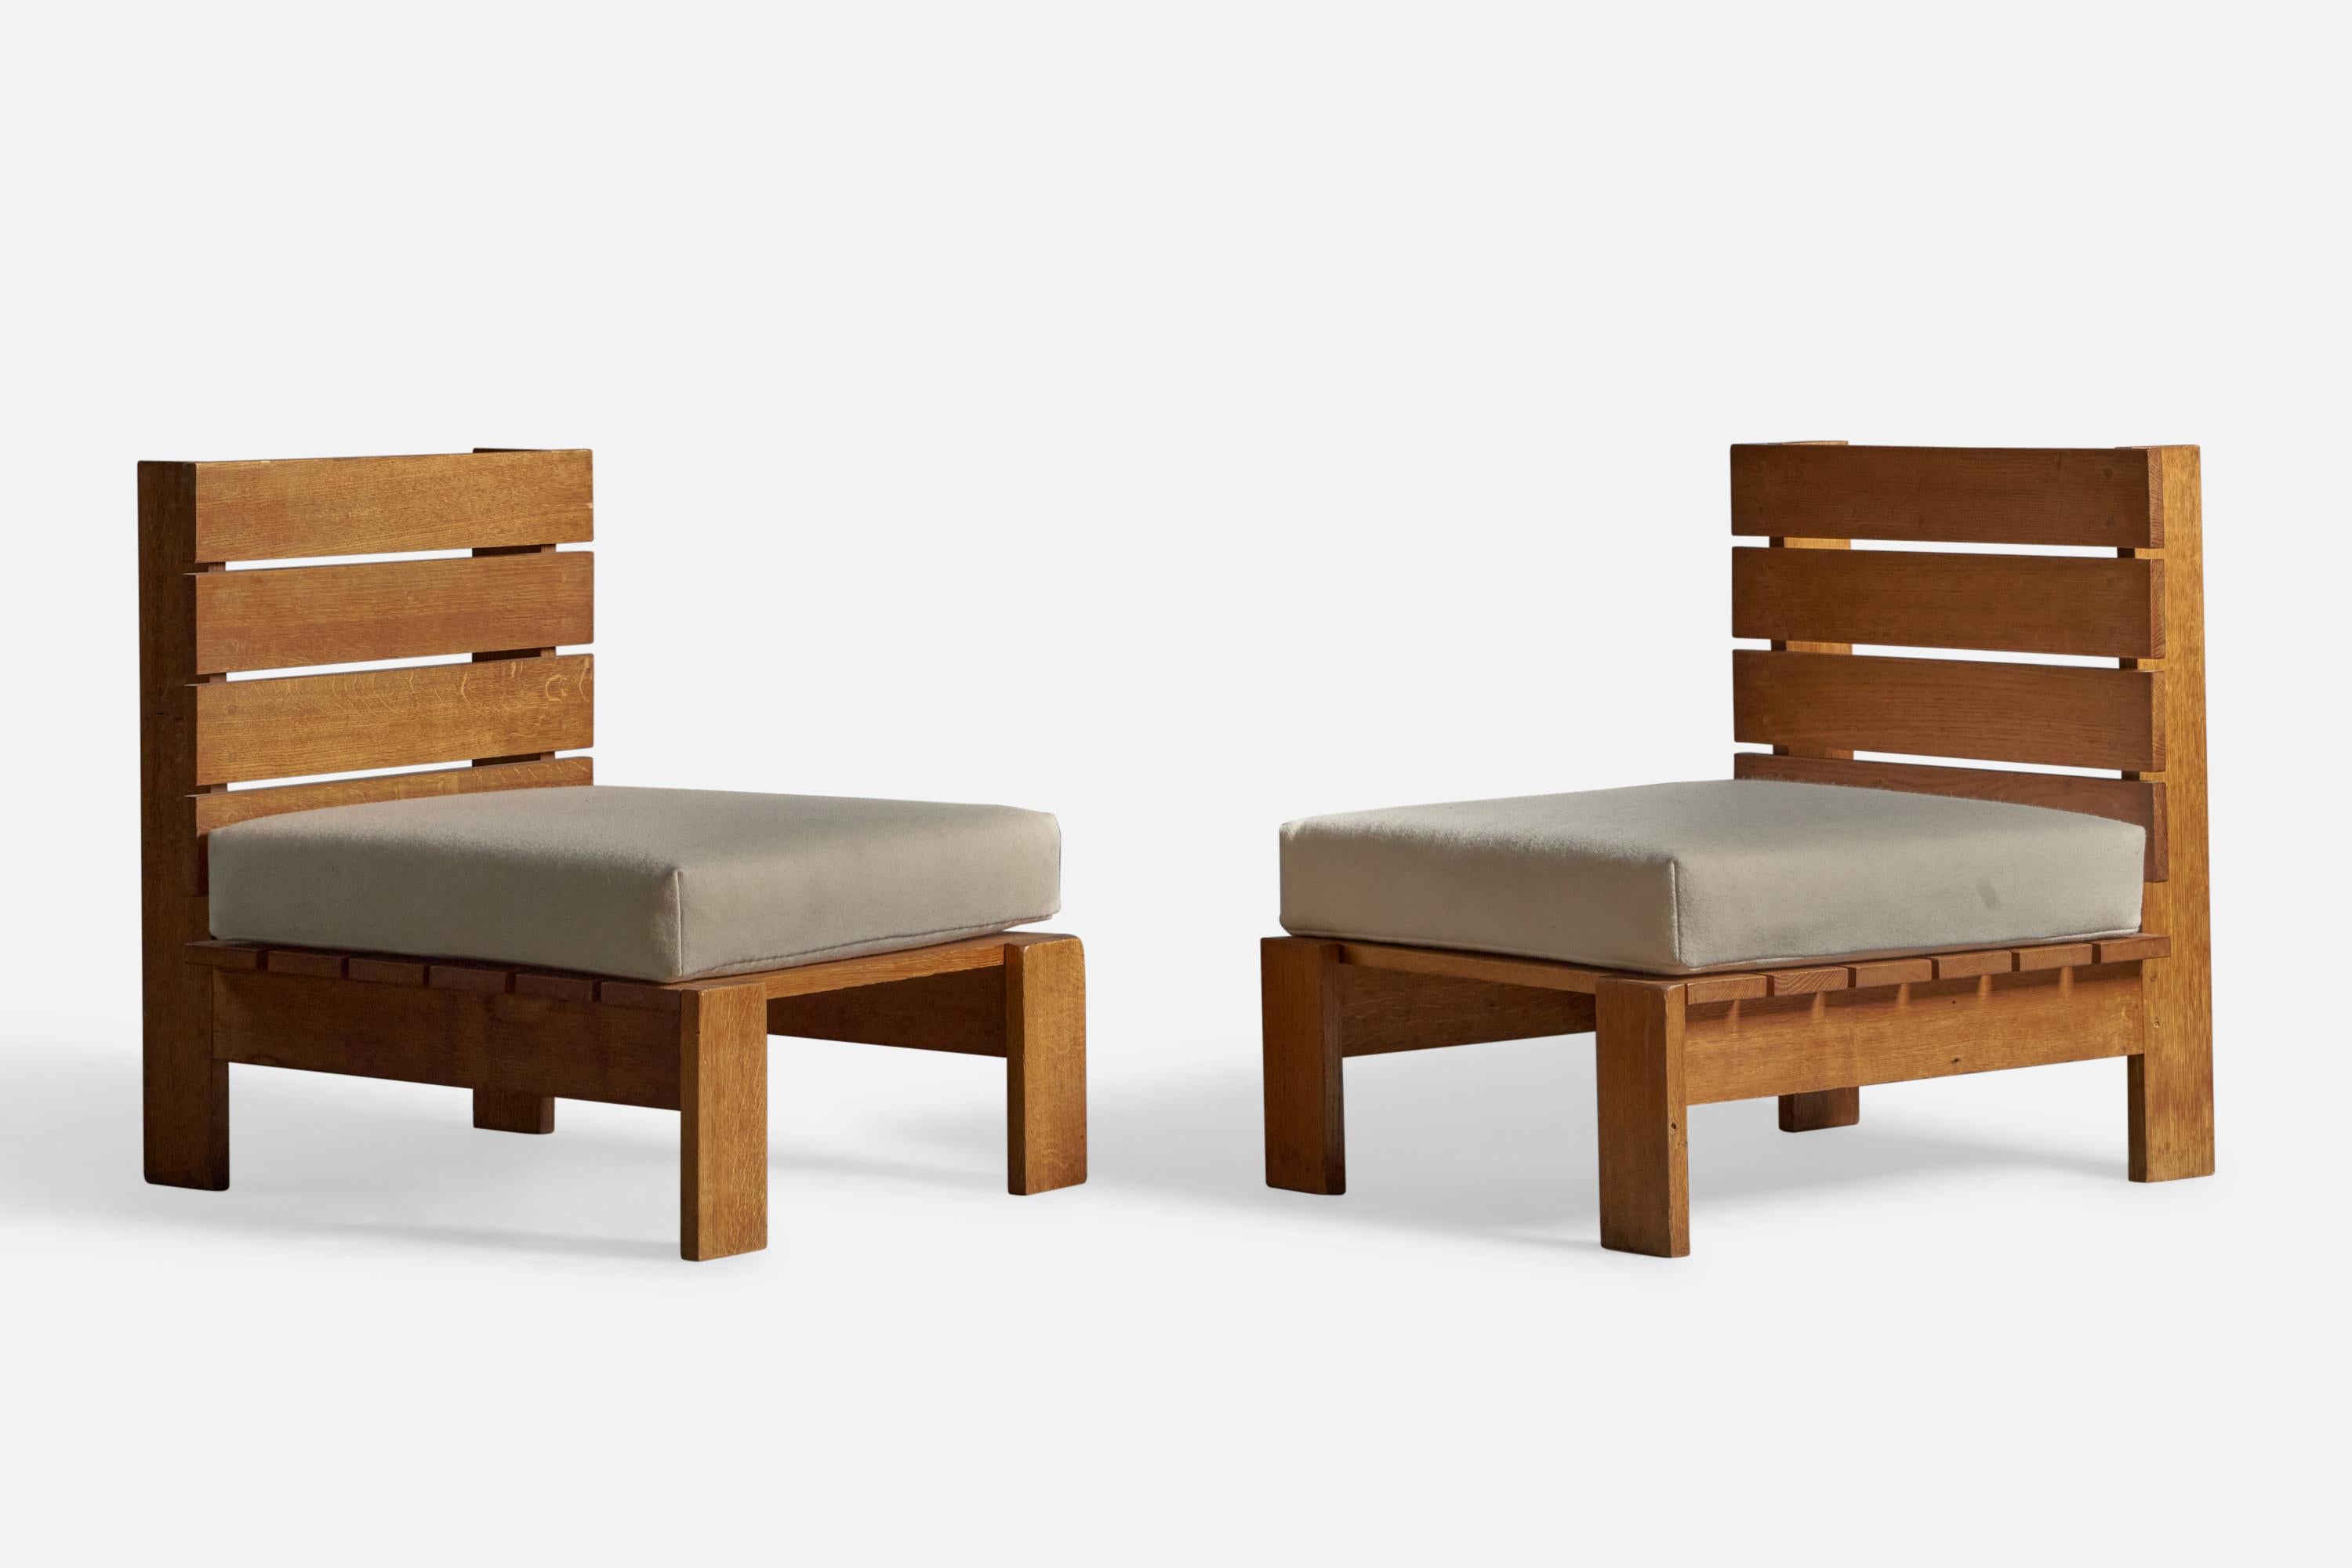 A pair of solid oak and beige fabric lounge chairs or slipper chairs, designed and produced in France, c. 1970s.